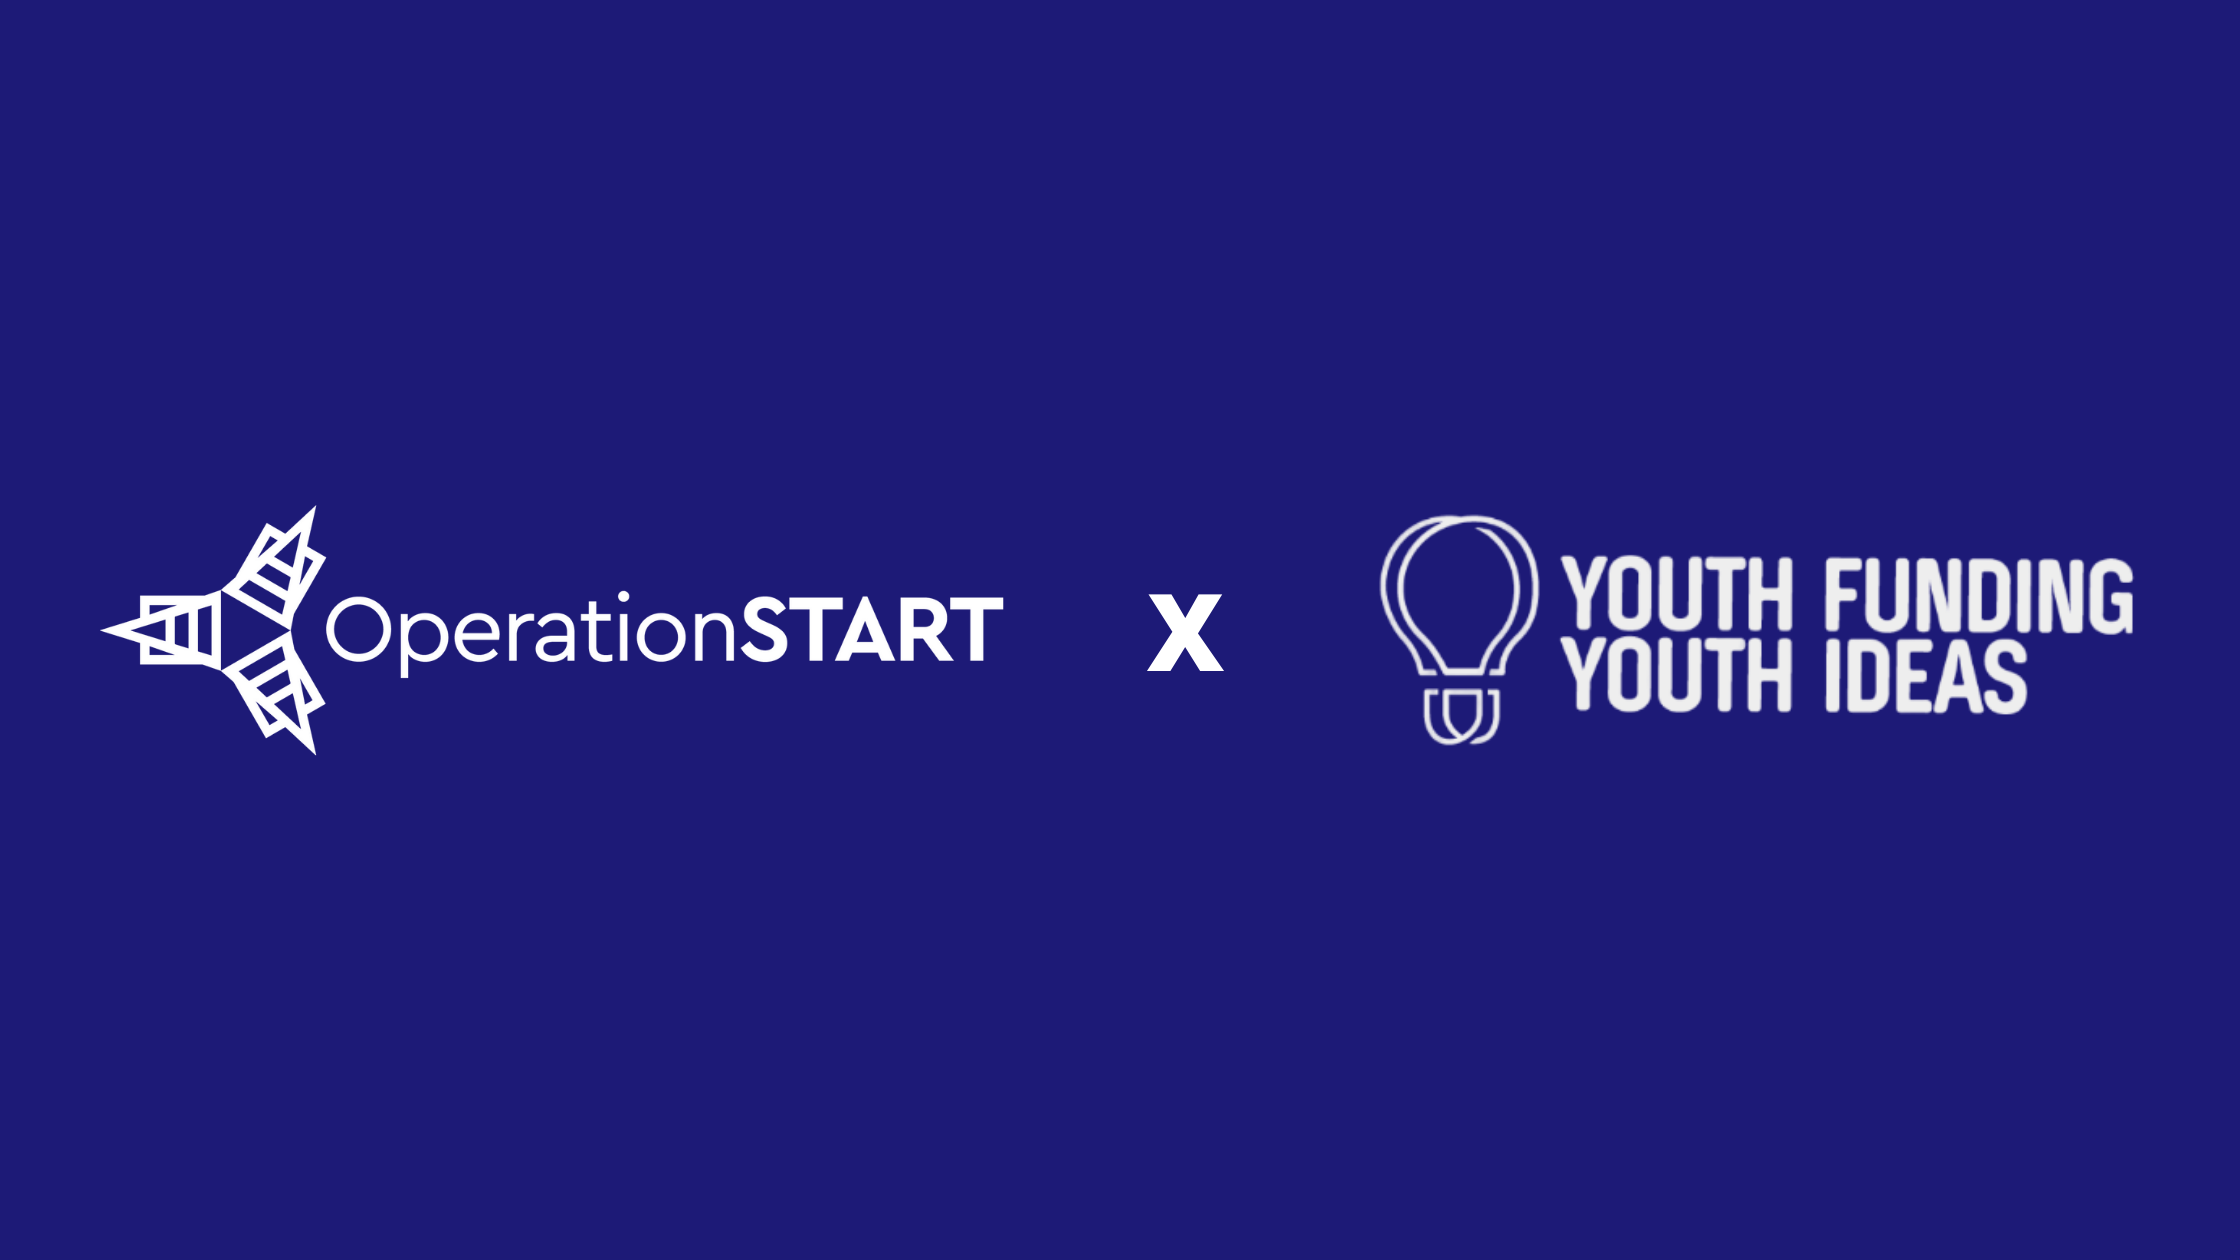 OperationSTART was awarded a $10,000 grant from Youth Funding Youth Ideas (YFYI)